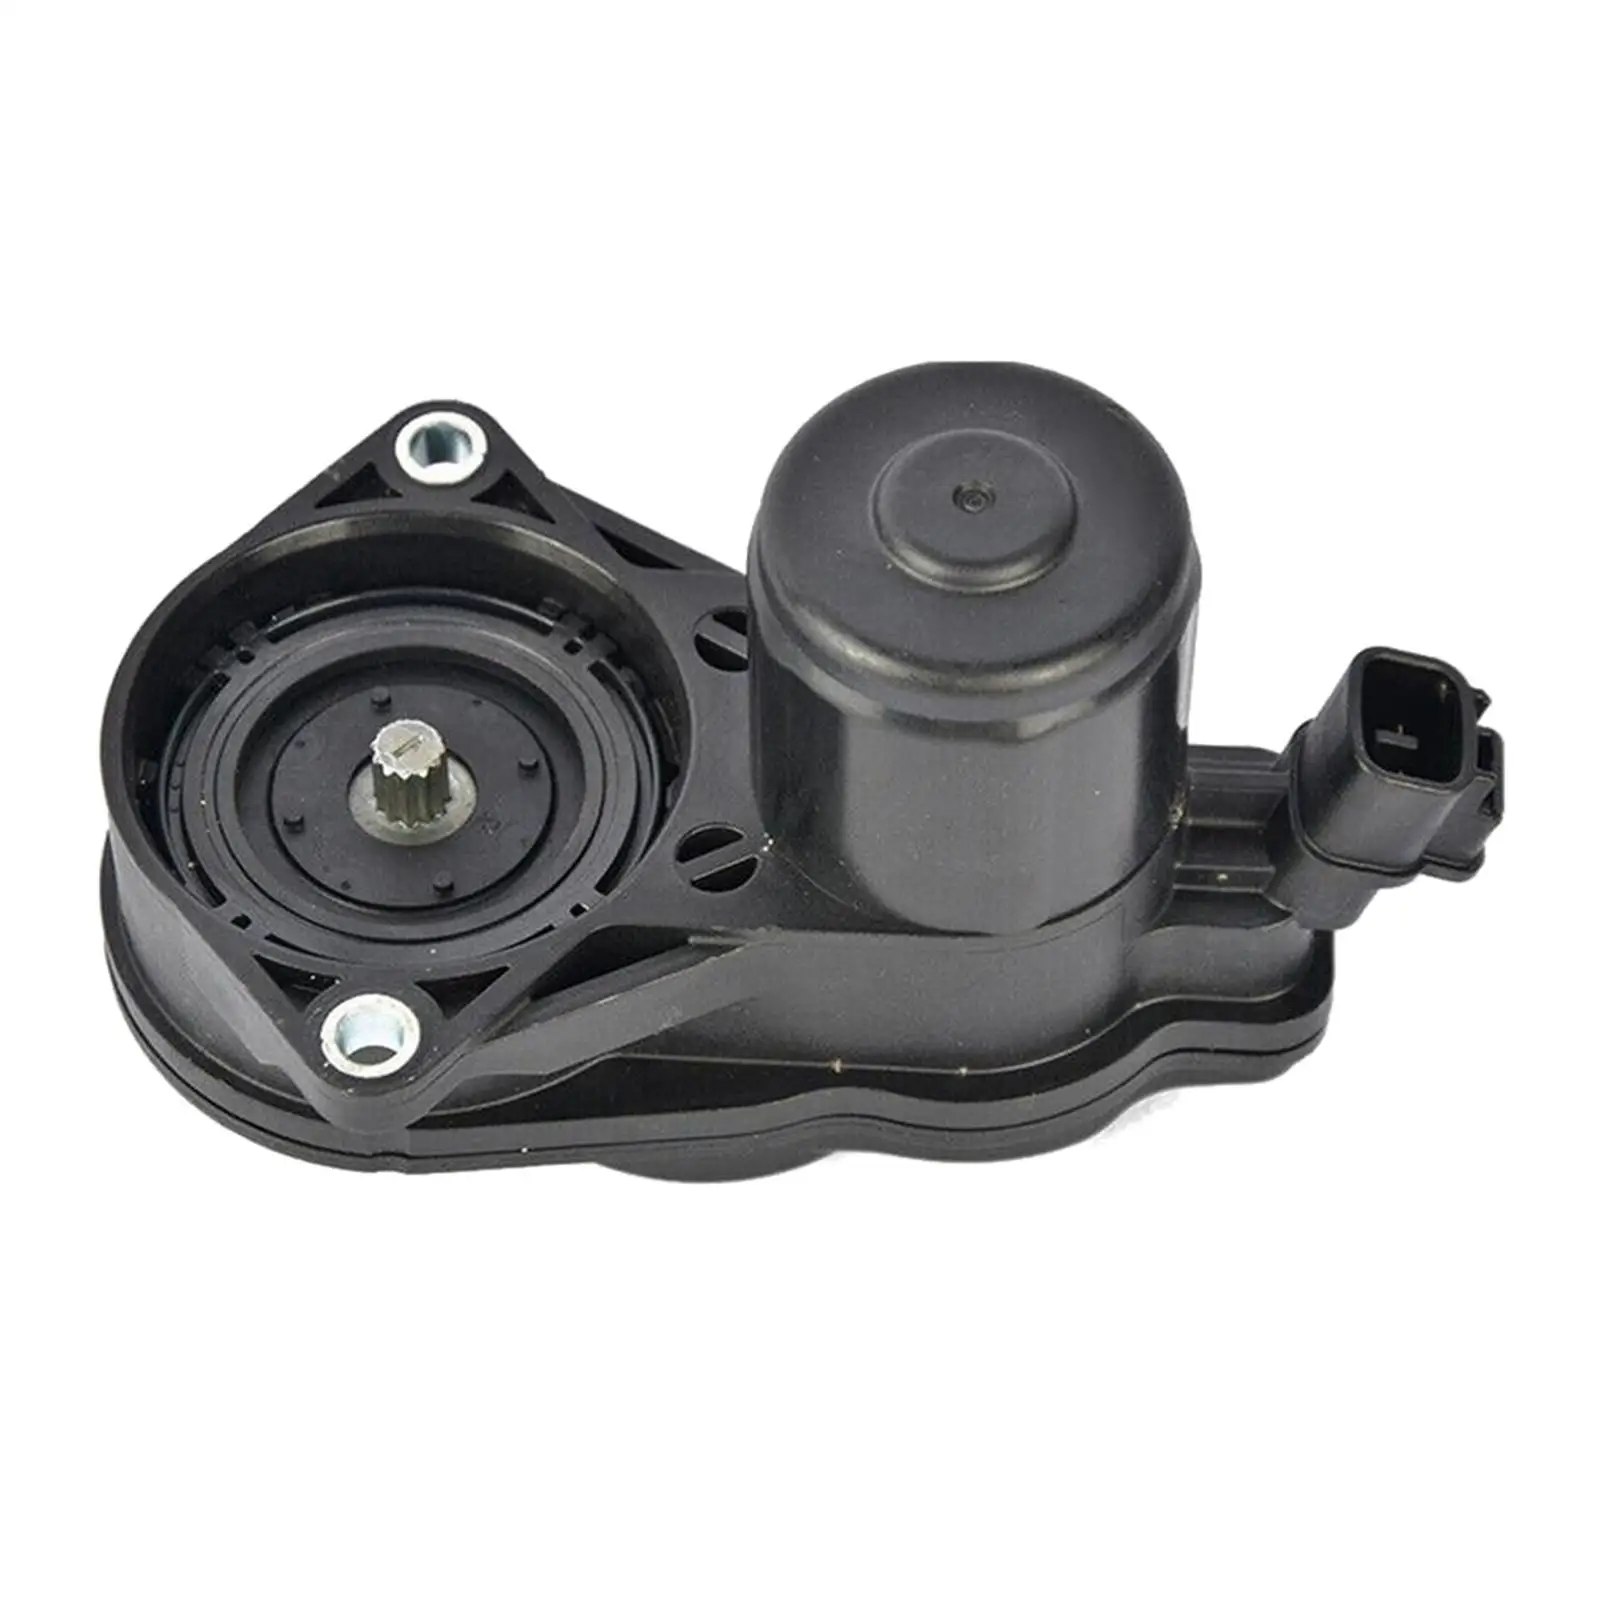 Parking Brake Actuator Replaces Automotive Replacement Part for Toyota Corolla Sedan for camry Venza Corolla Hatchback